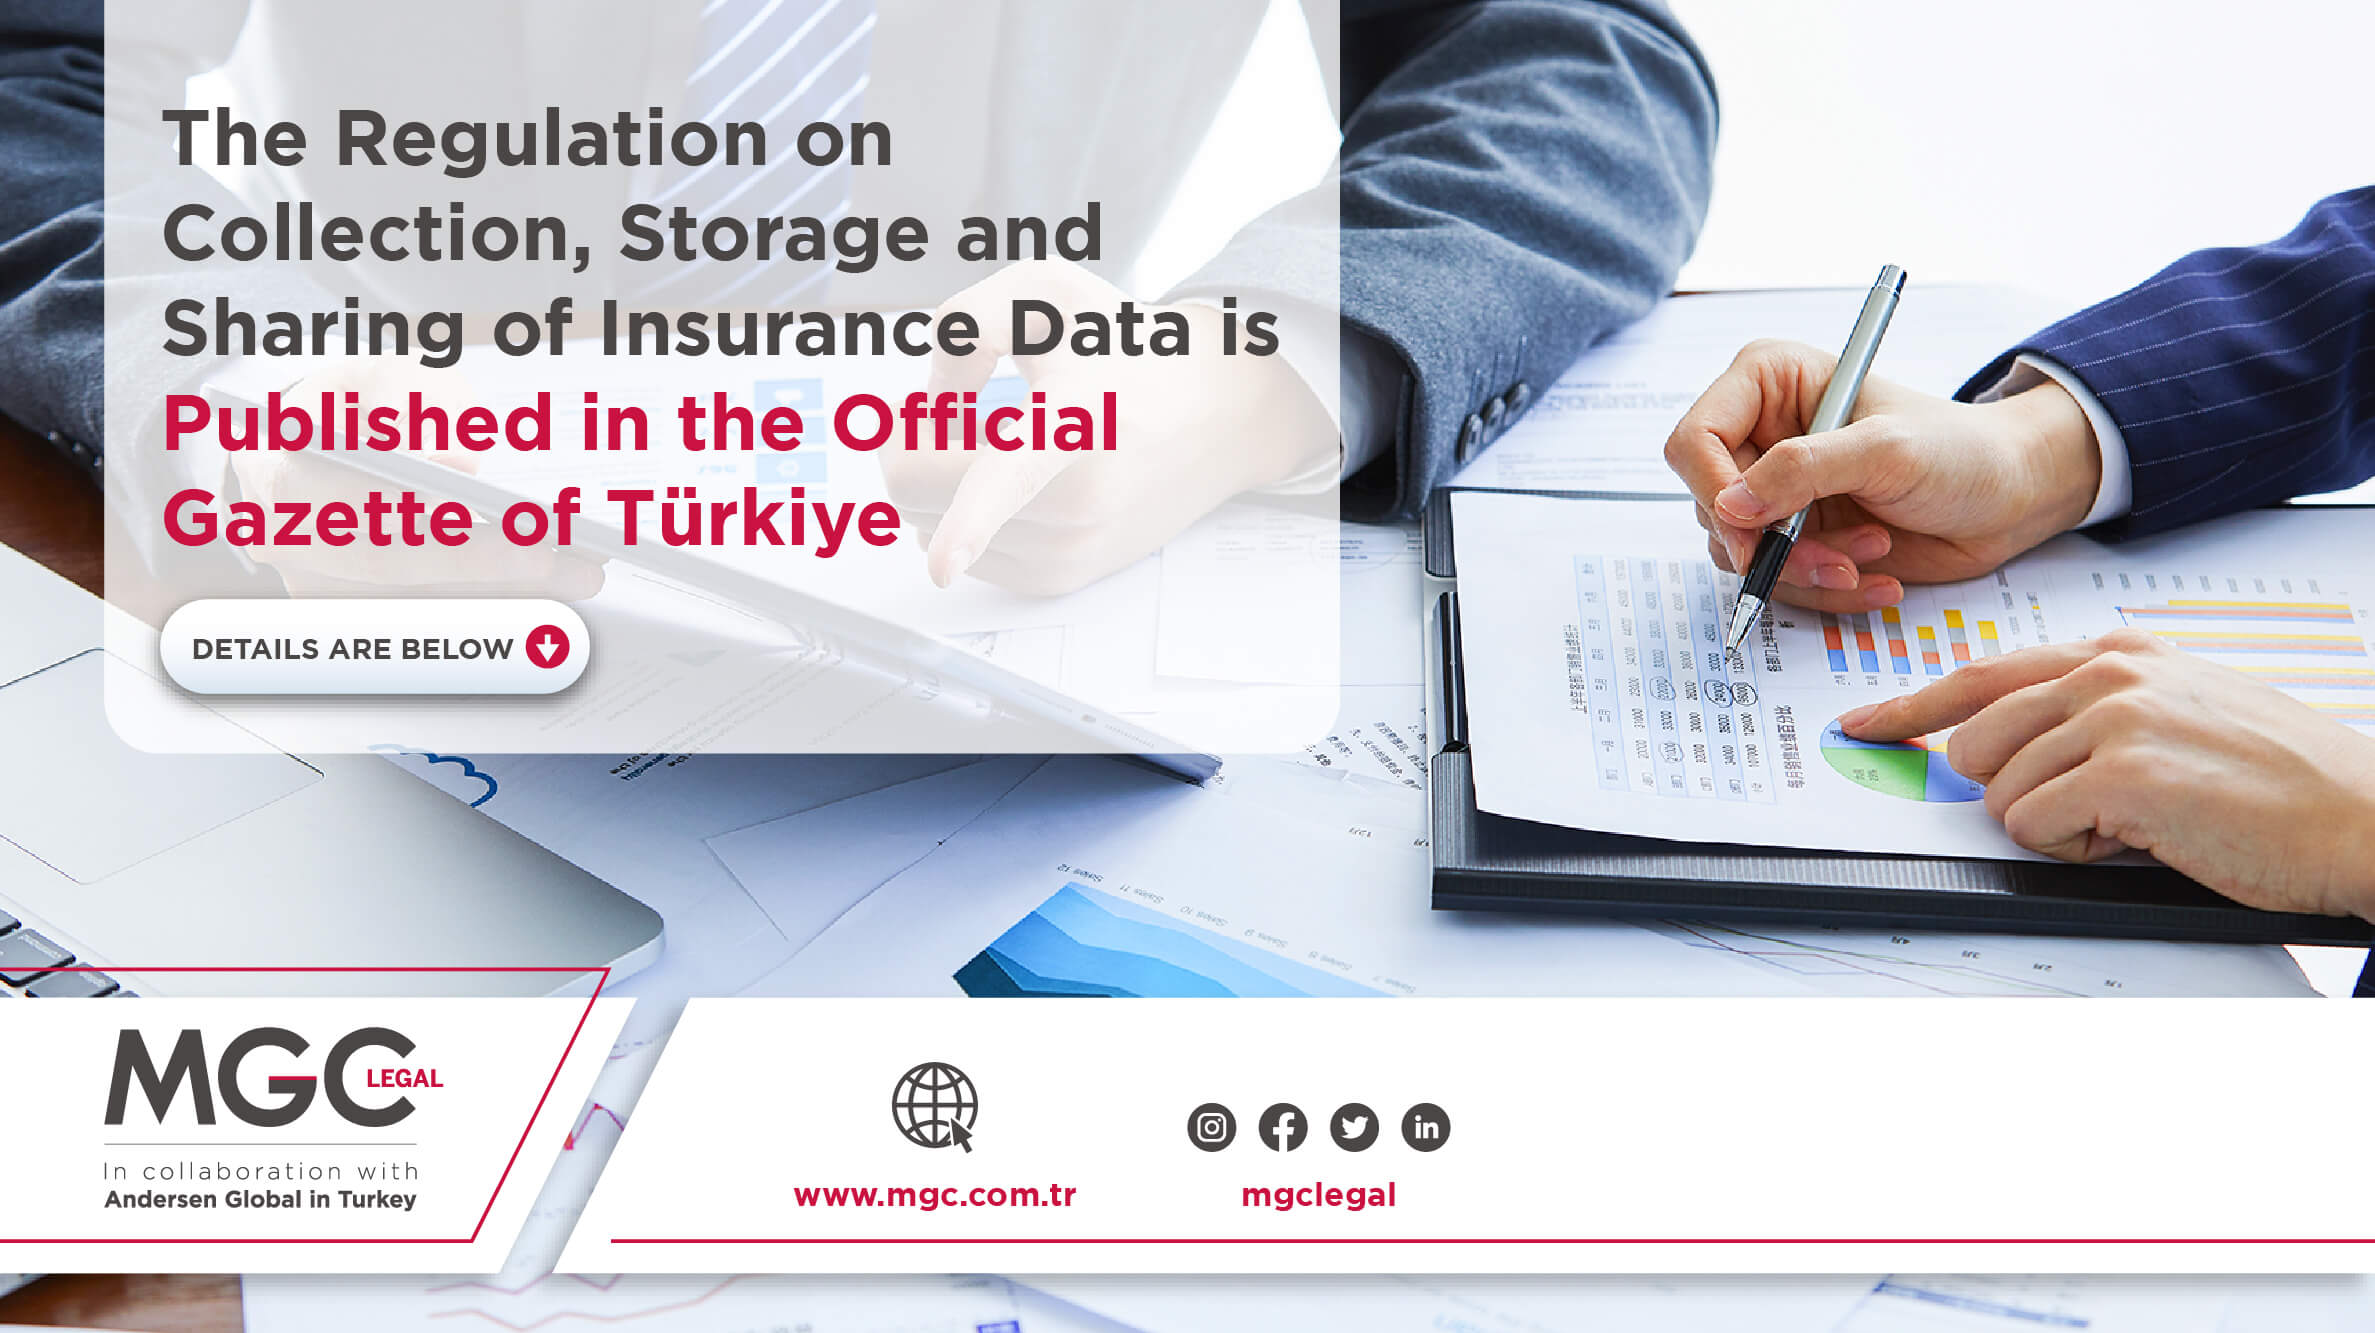 The Regulation on Collection, Storage and Sharing of Insurance Data is Published in the Official Gazette of Türkiye